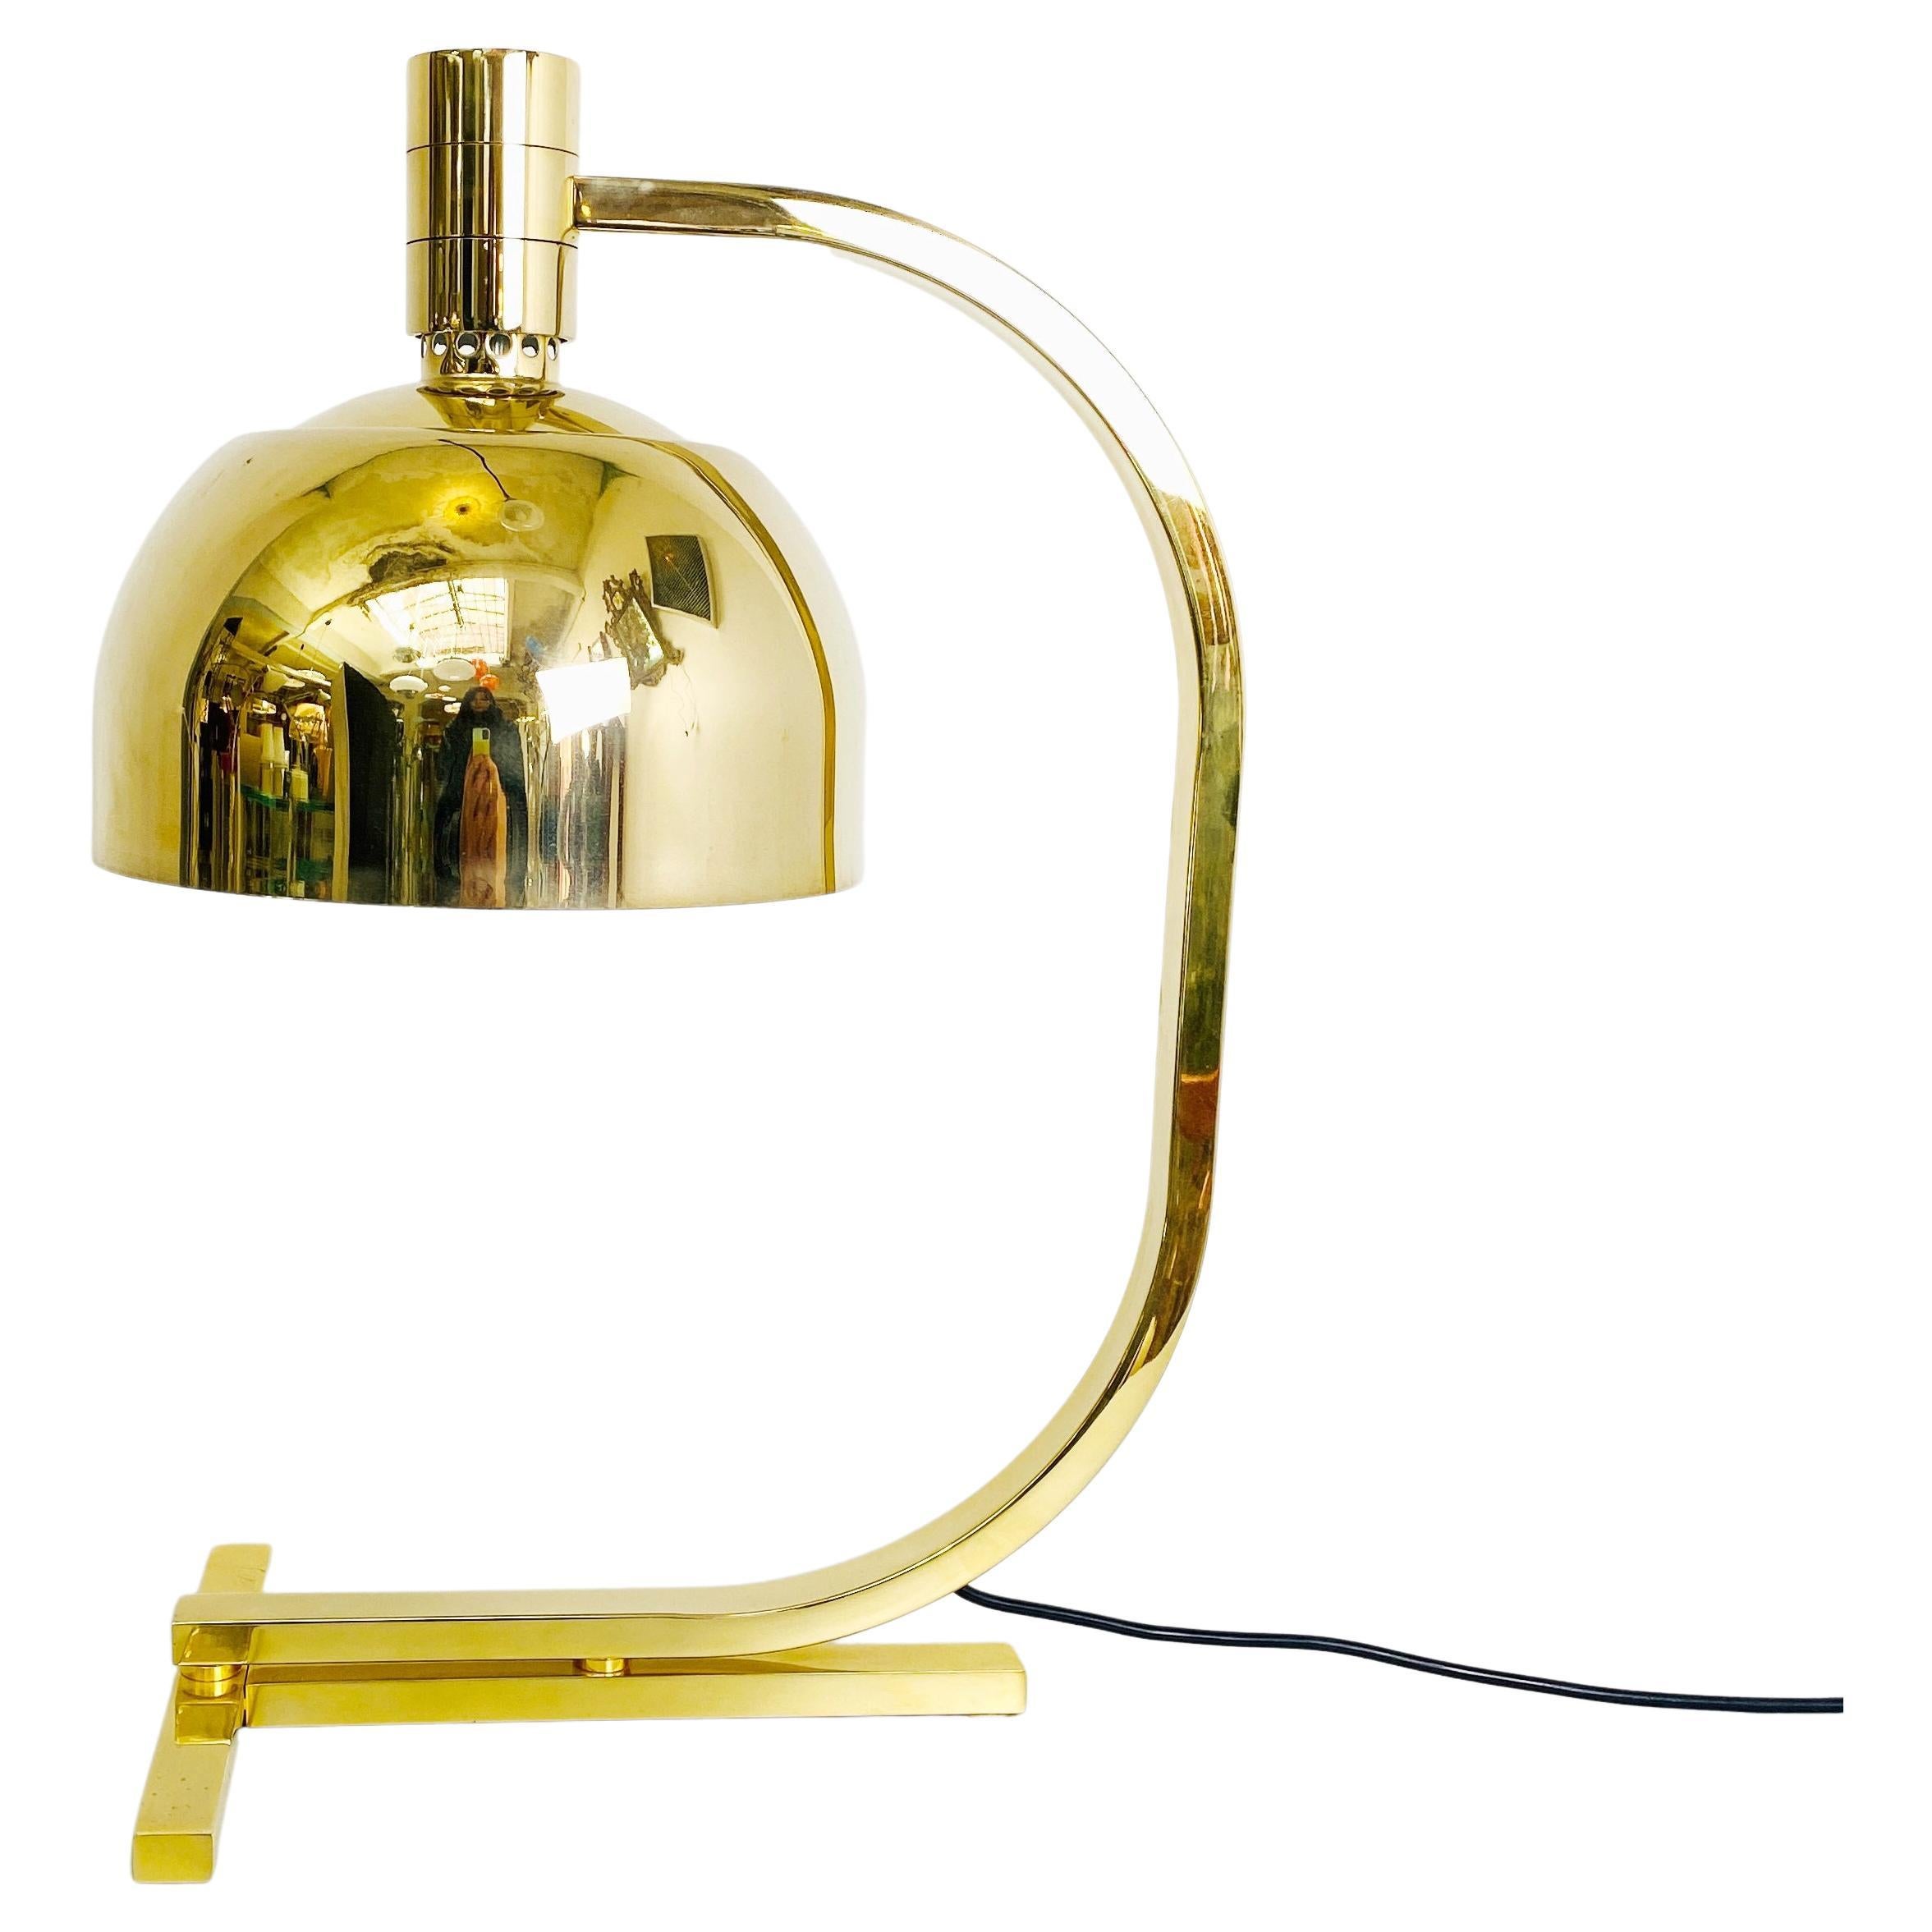 AM \ AS Gold Chrome Table Lamp by Franco Albini and Franca Helg for Sirrah, 1969 For Sale